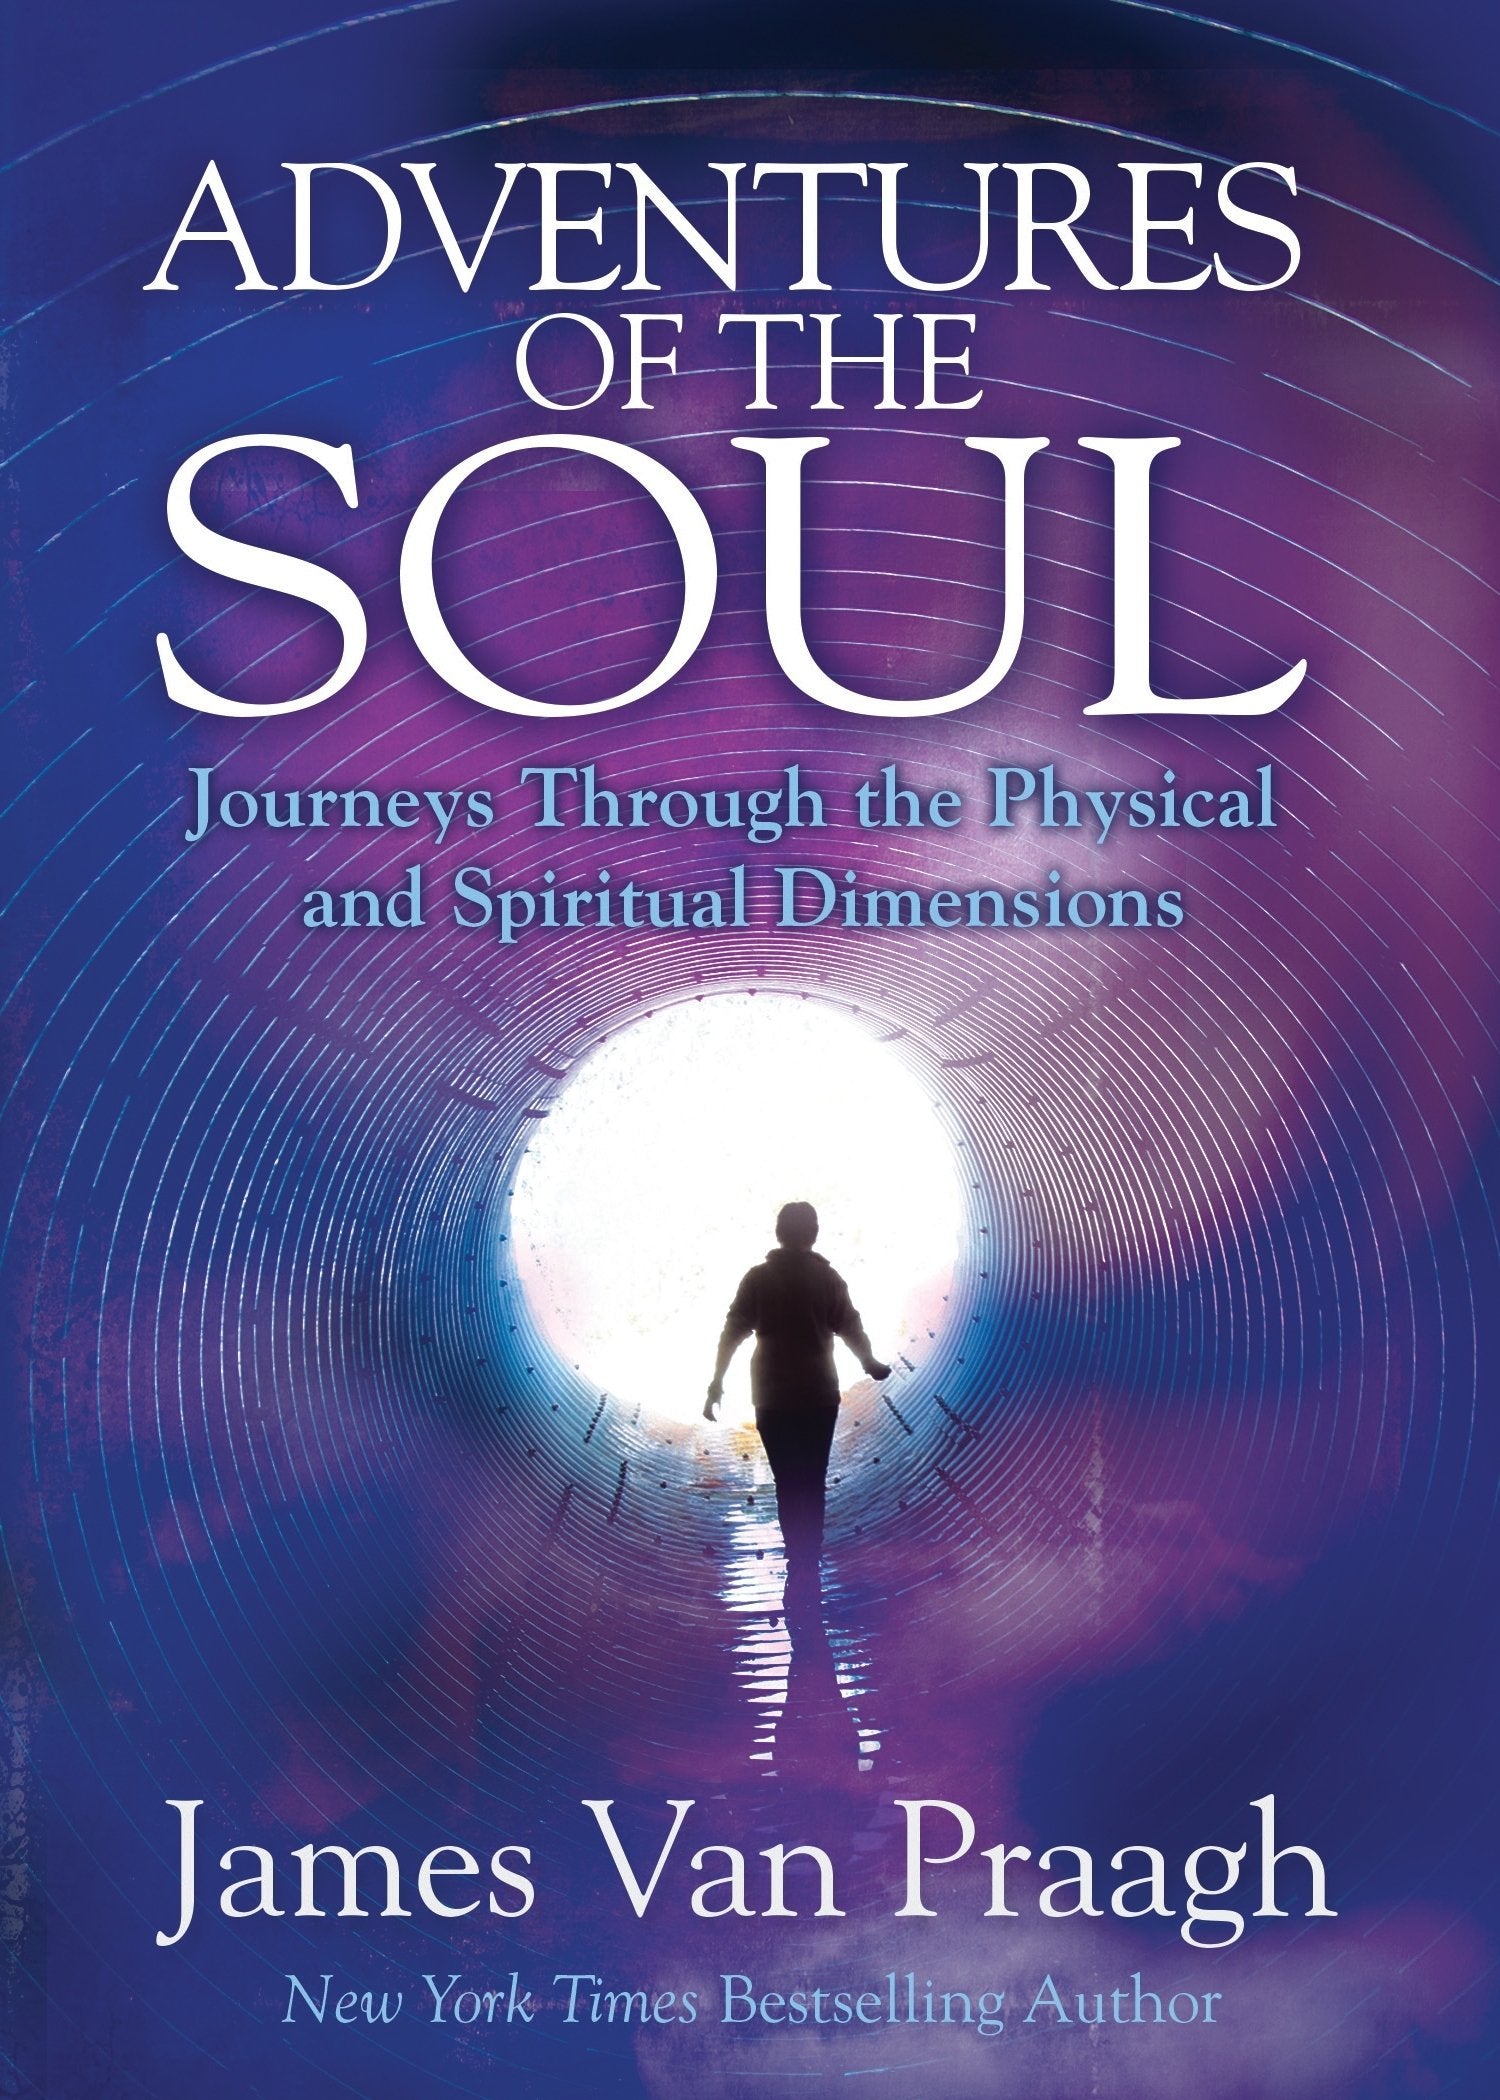 Adventures of the Soul: Journeys Through the Physical and Spiritual Dimensions || James Van Praagh (Paperback)